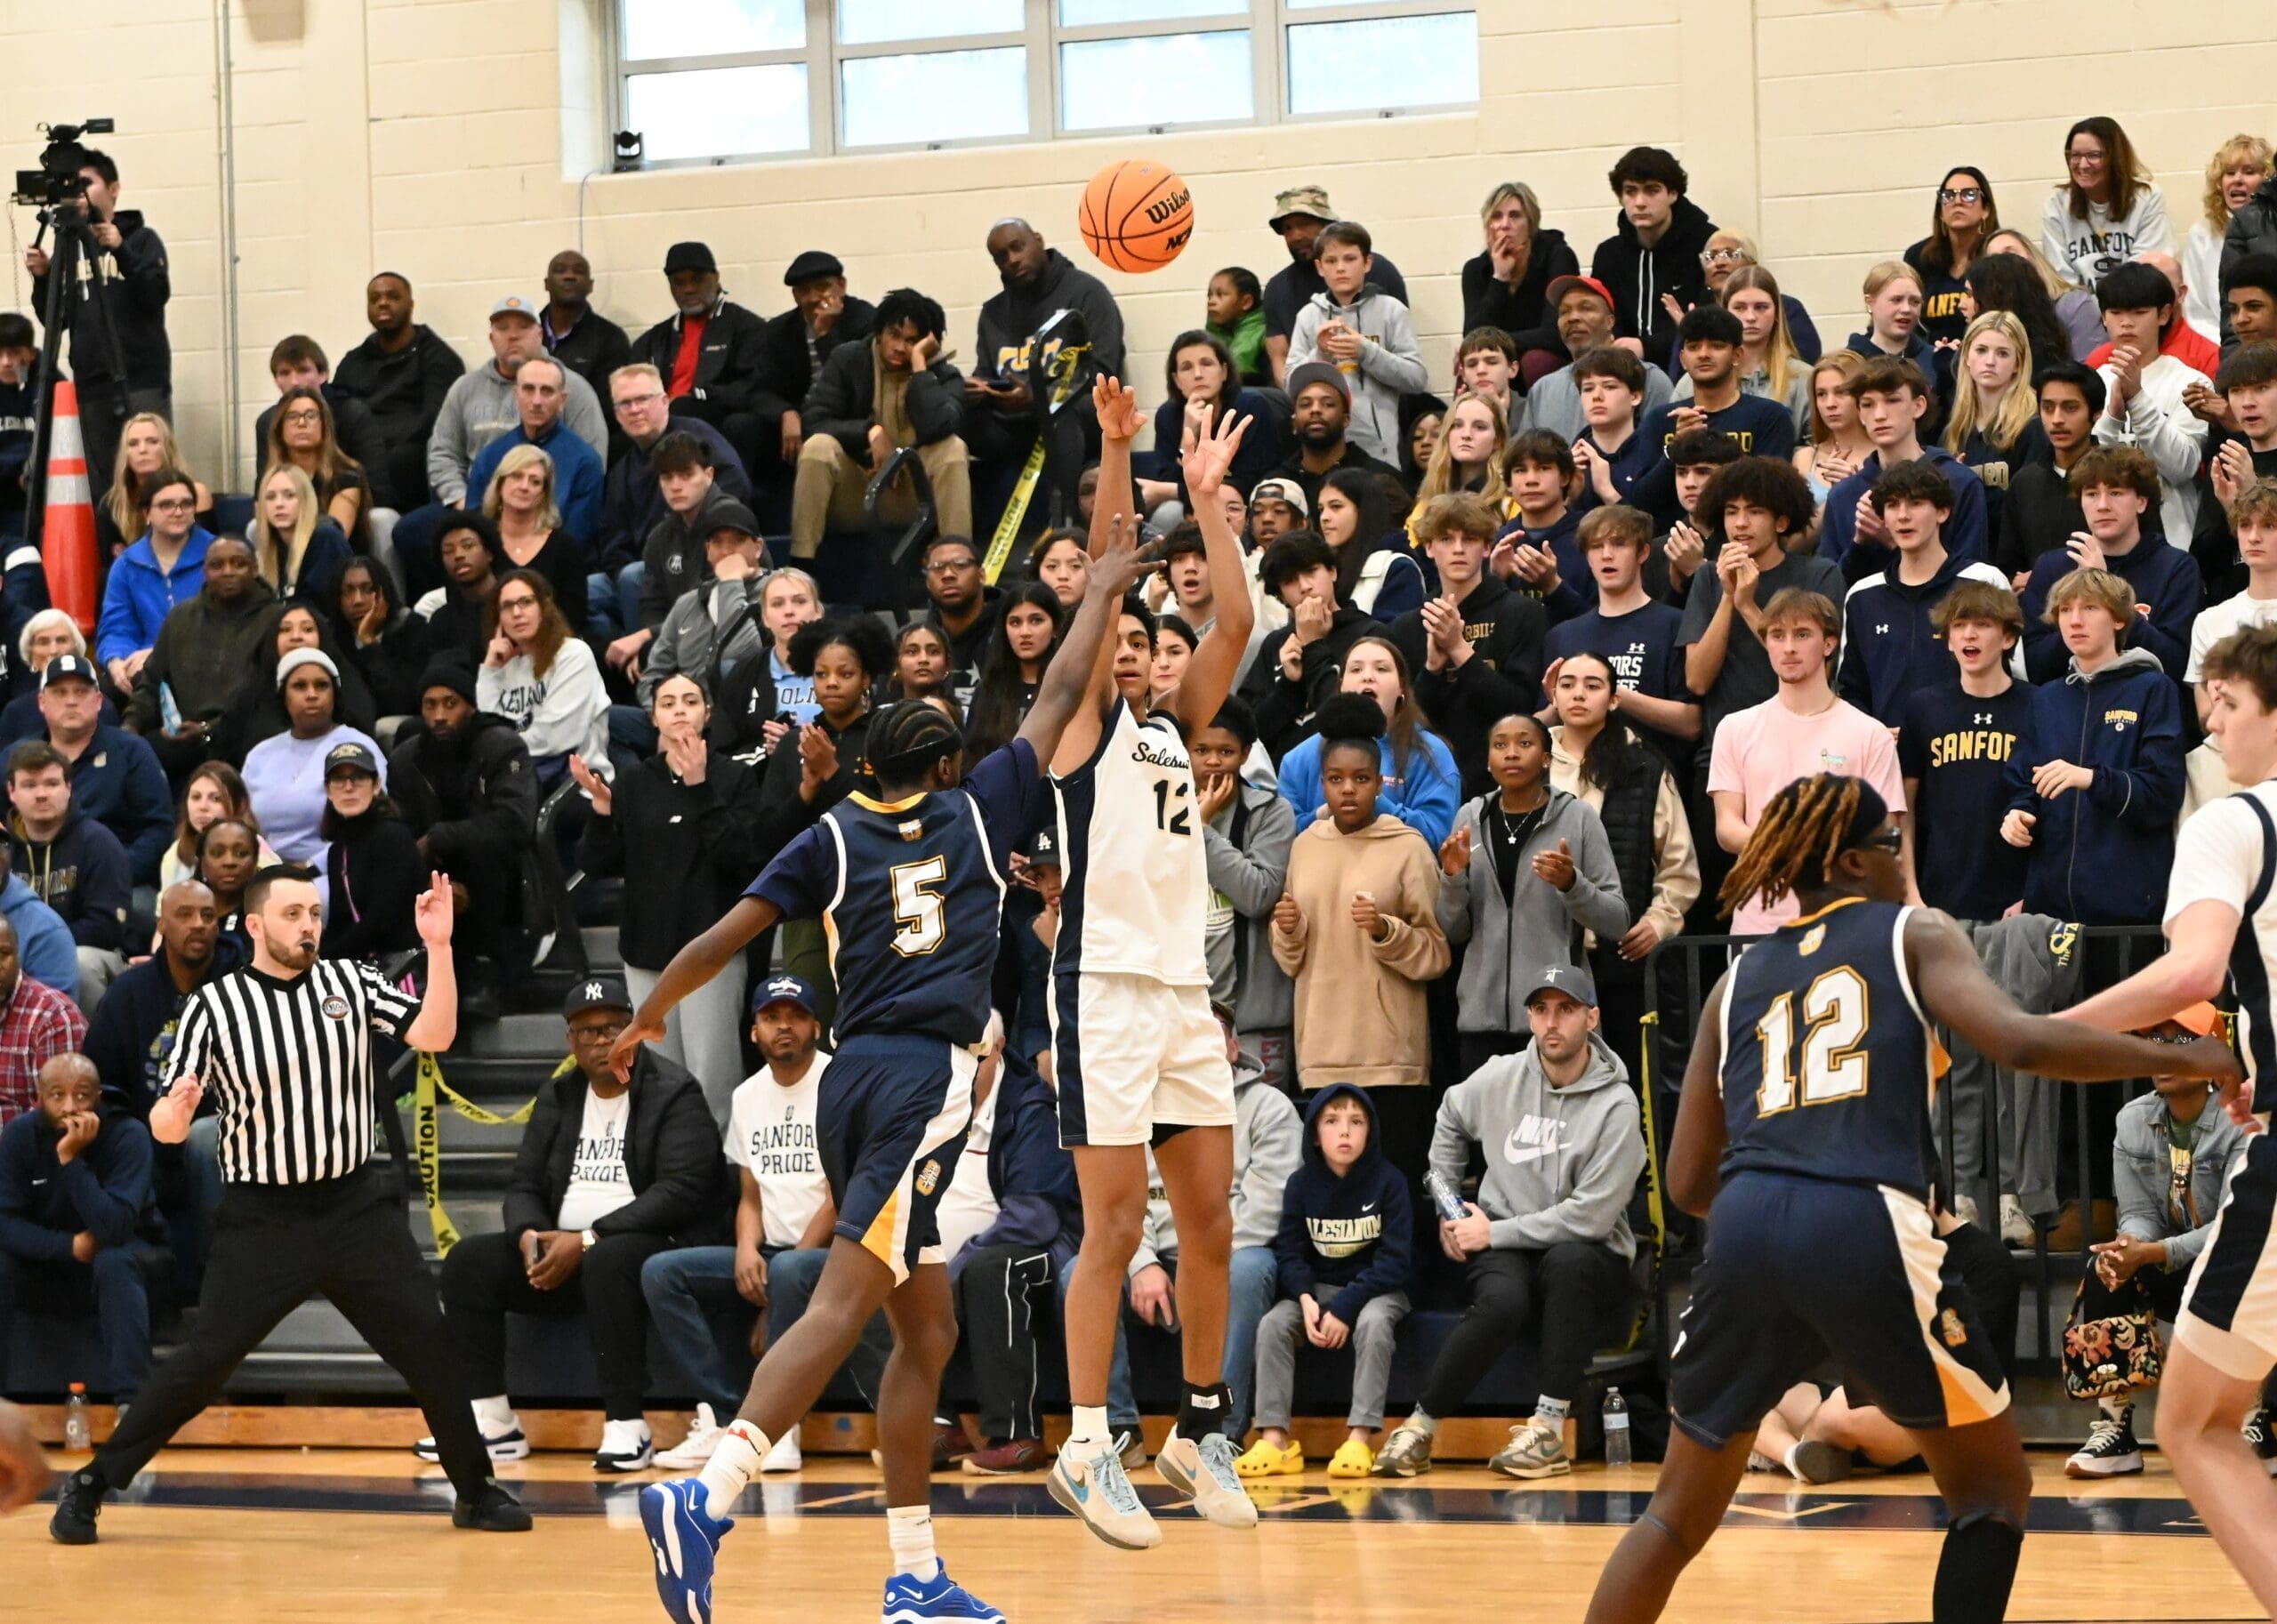 Featured image for “Salesianum survives late push by Sanford to advance”